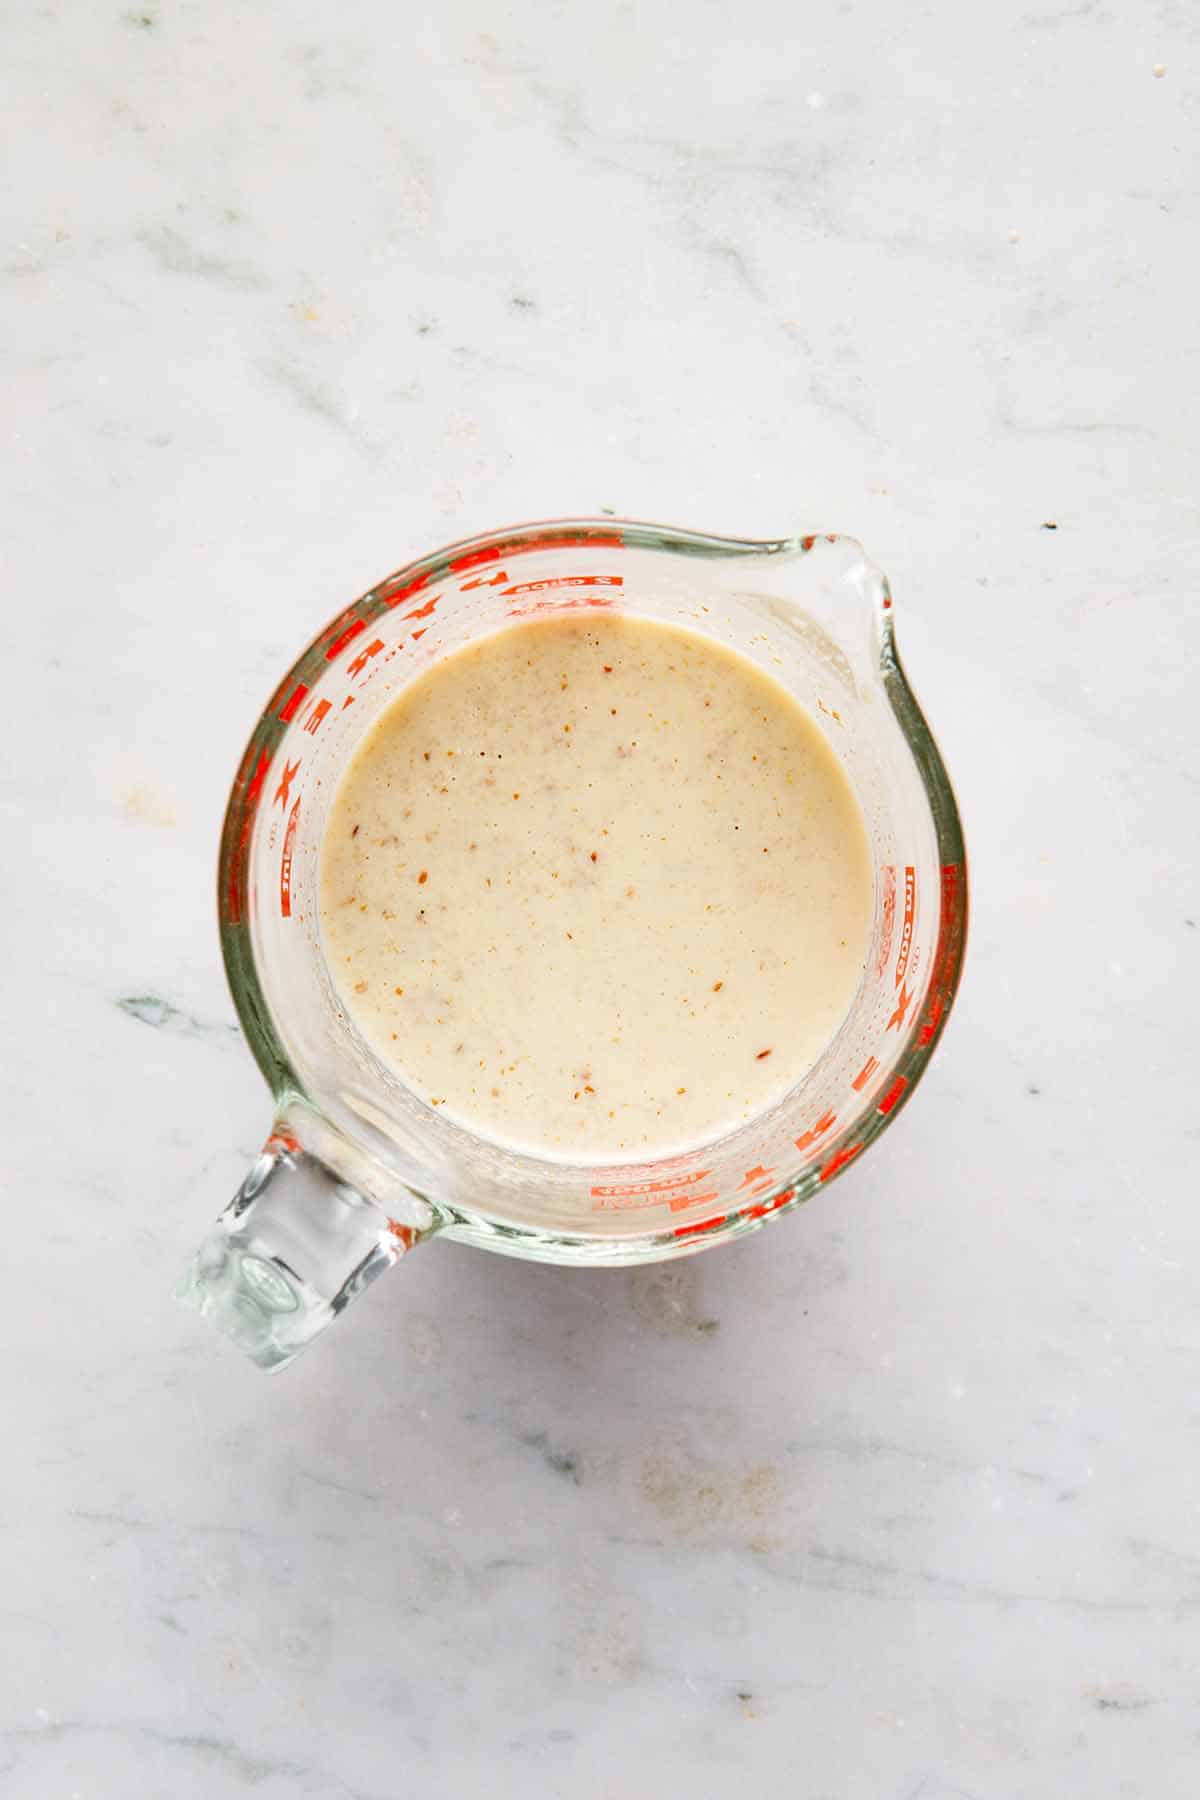 Plant-based milk, flax meal, and vanilla mixed together in a measuring cup.